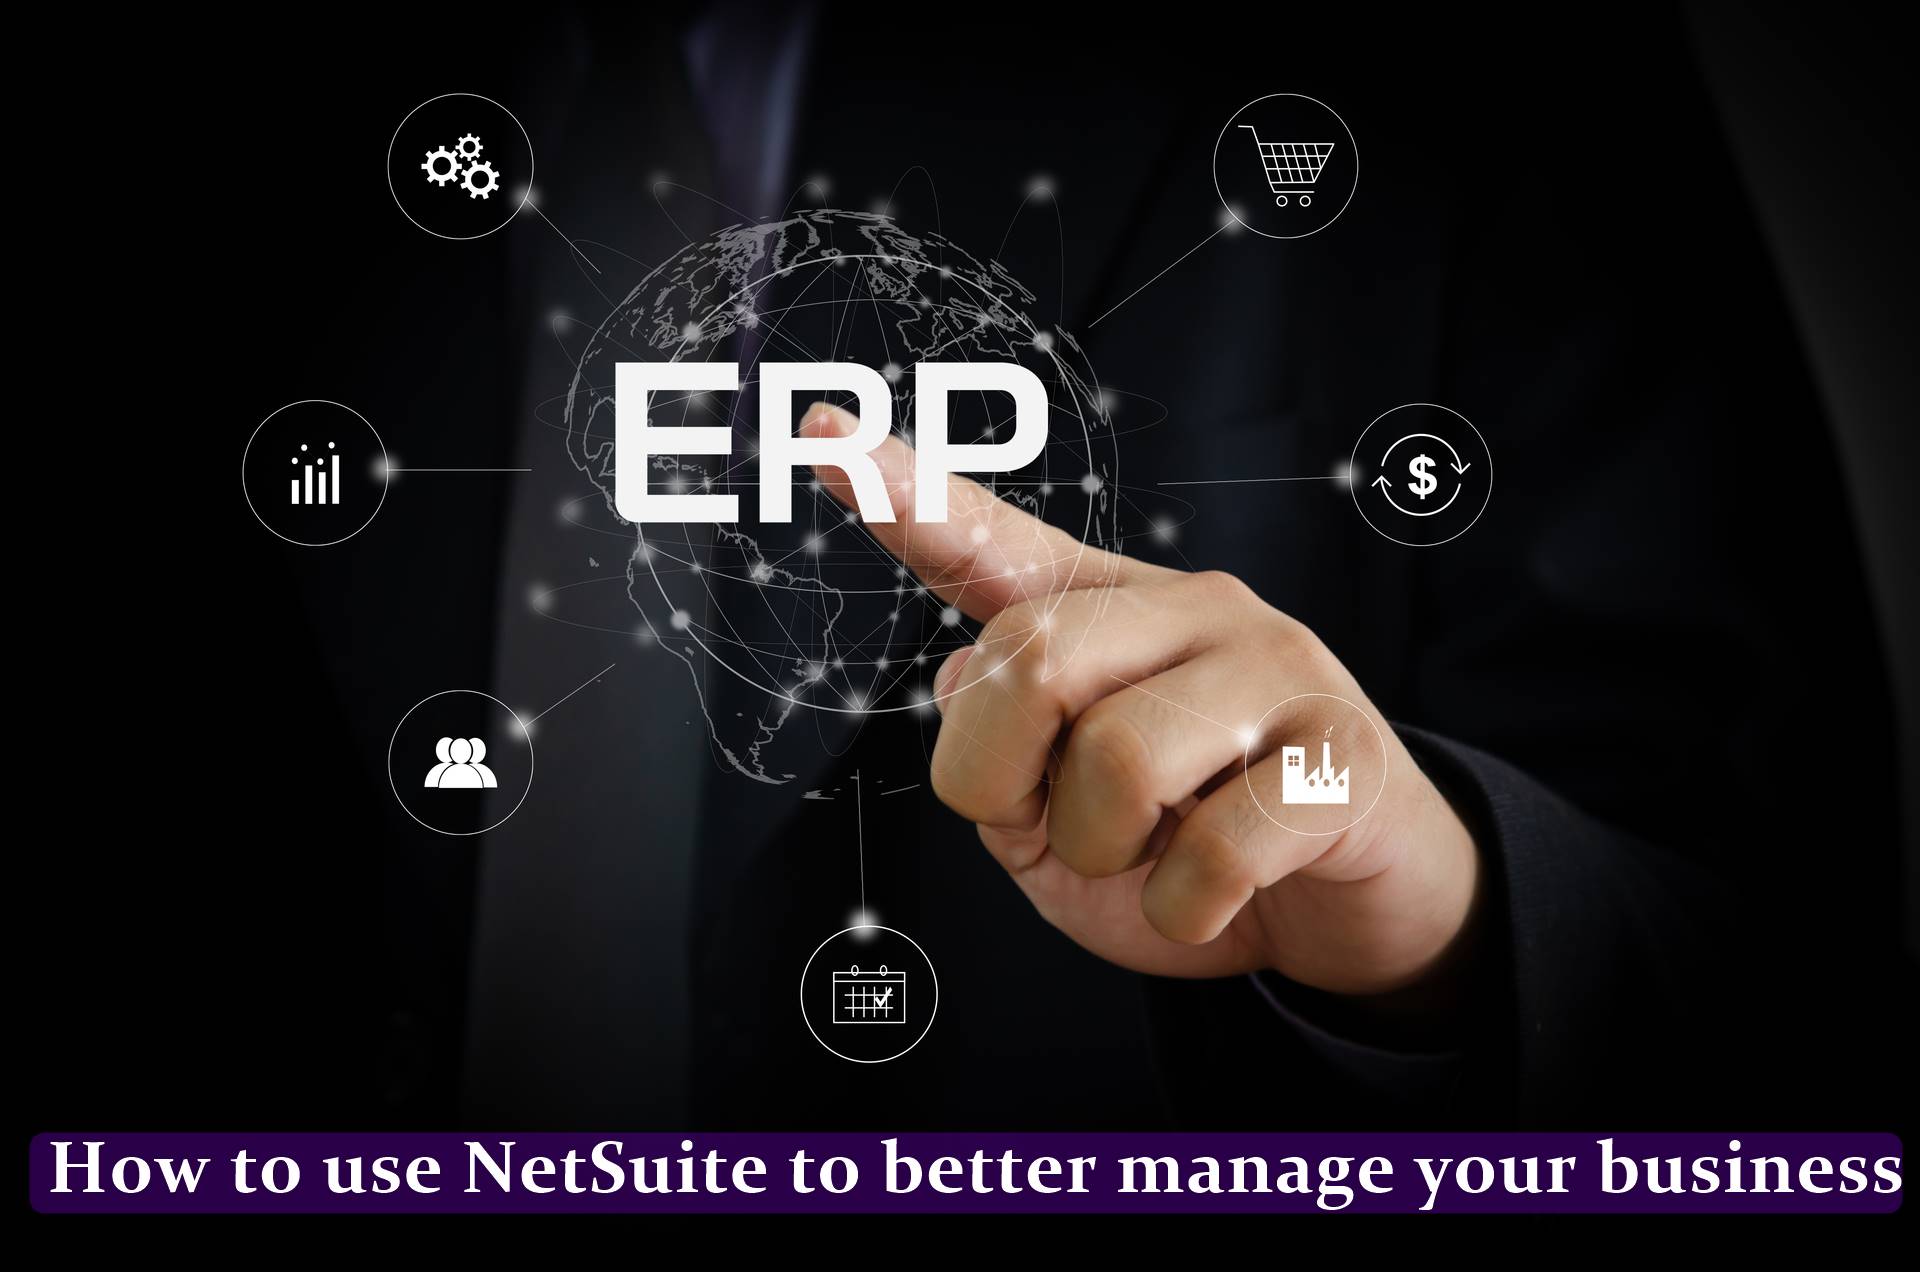 How to use NetSuite to better manage your business